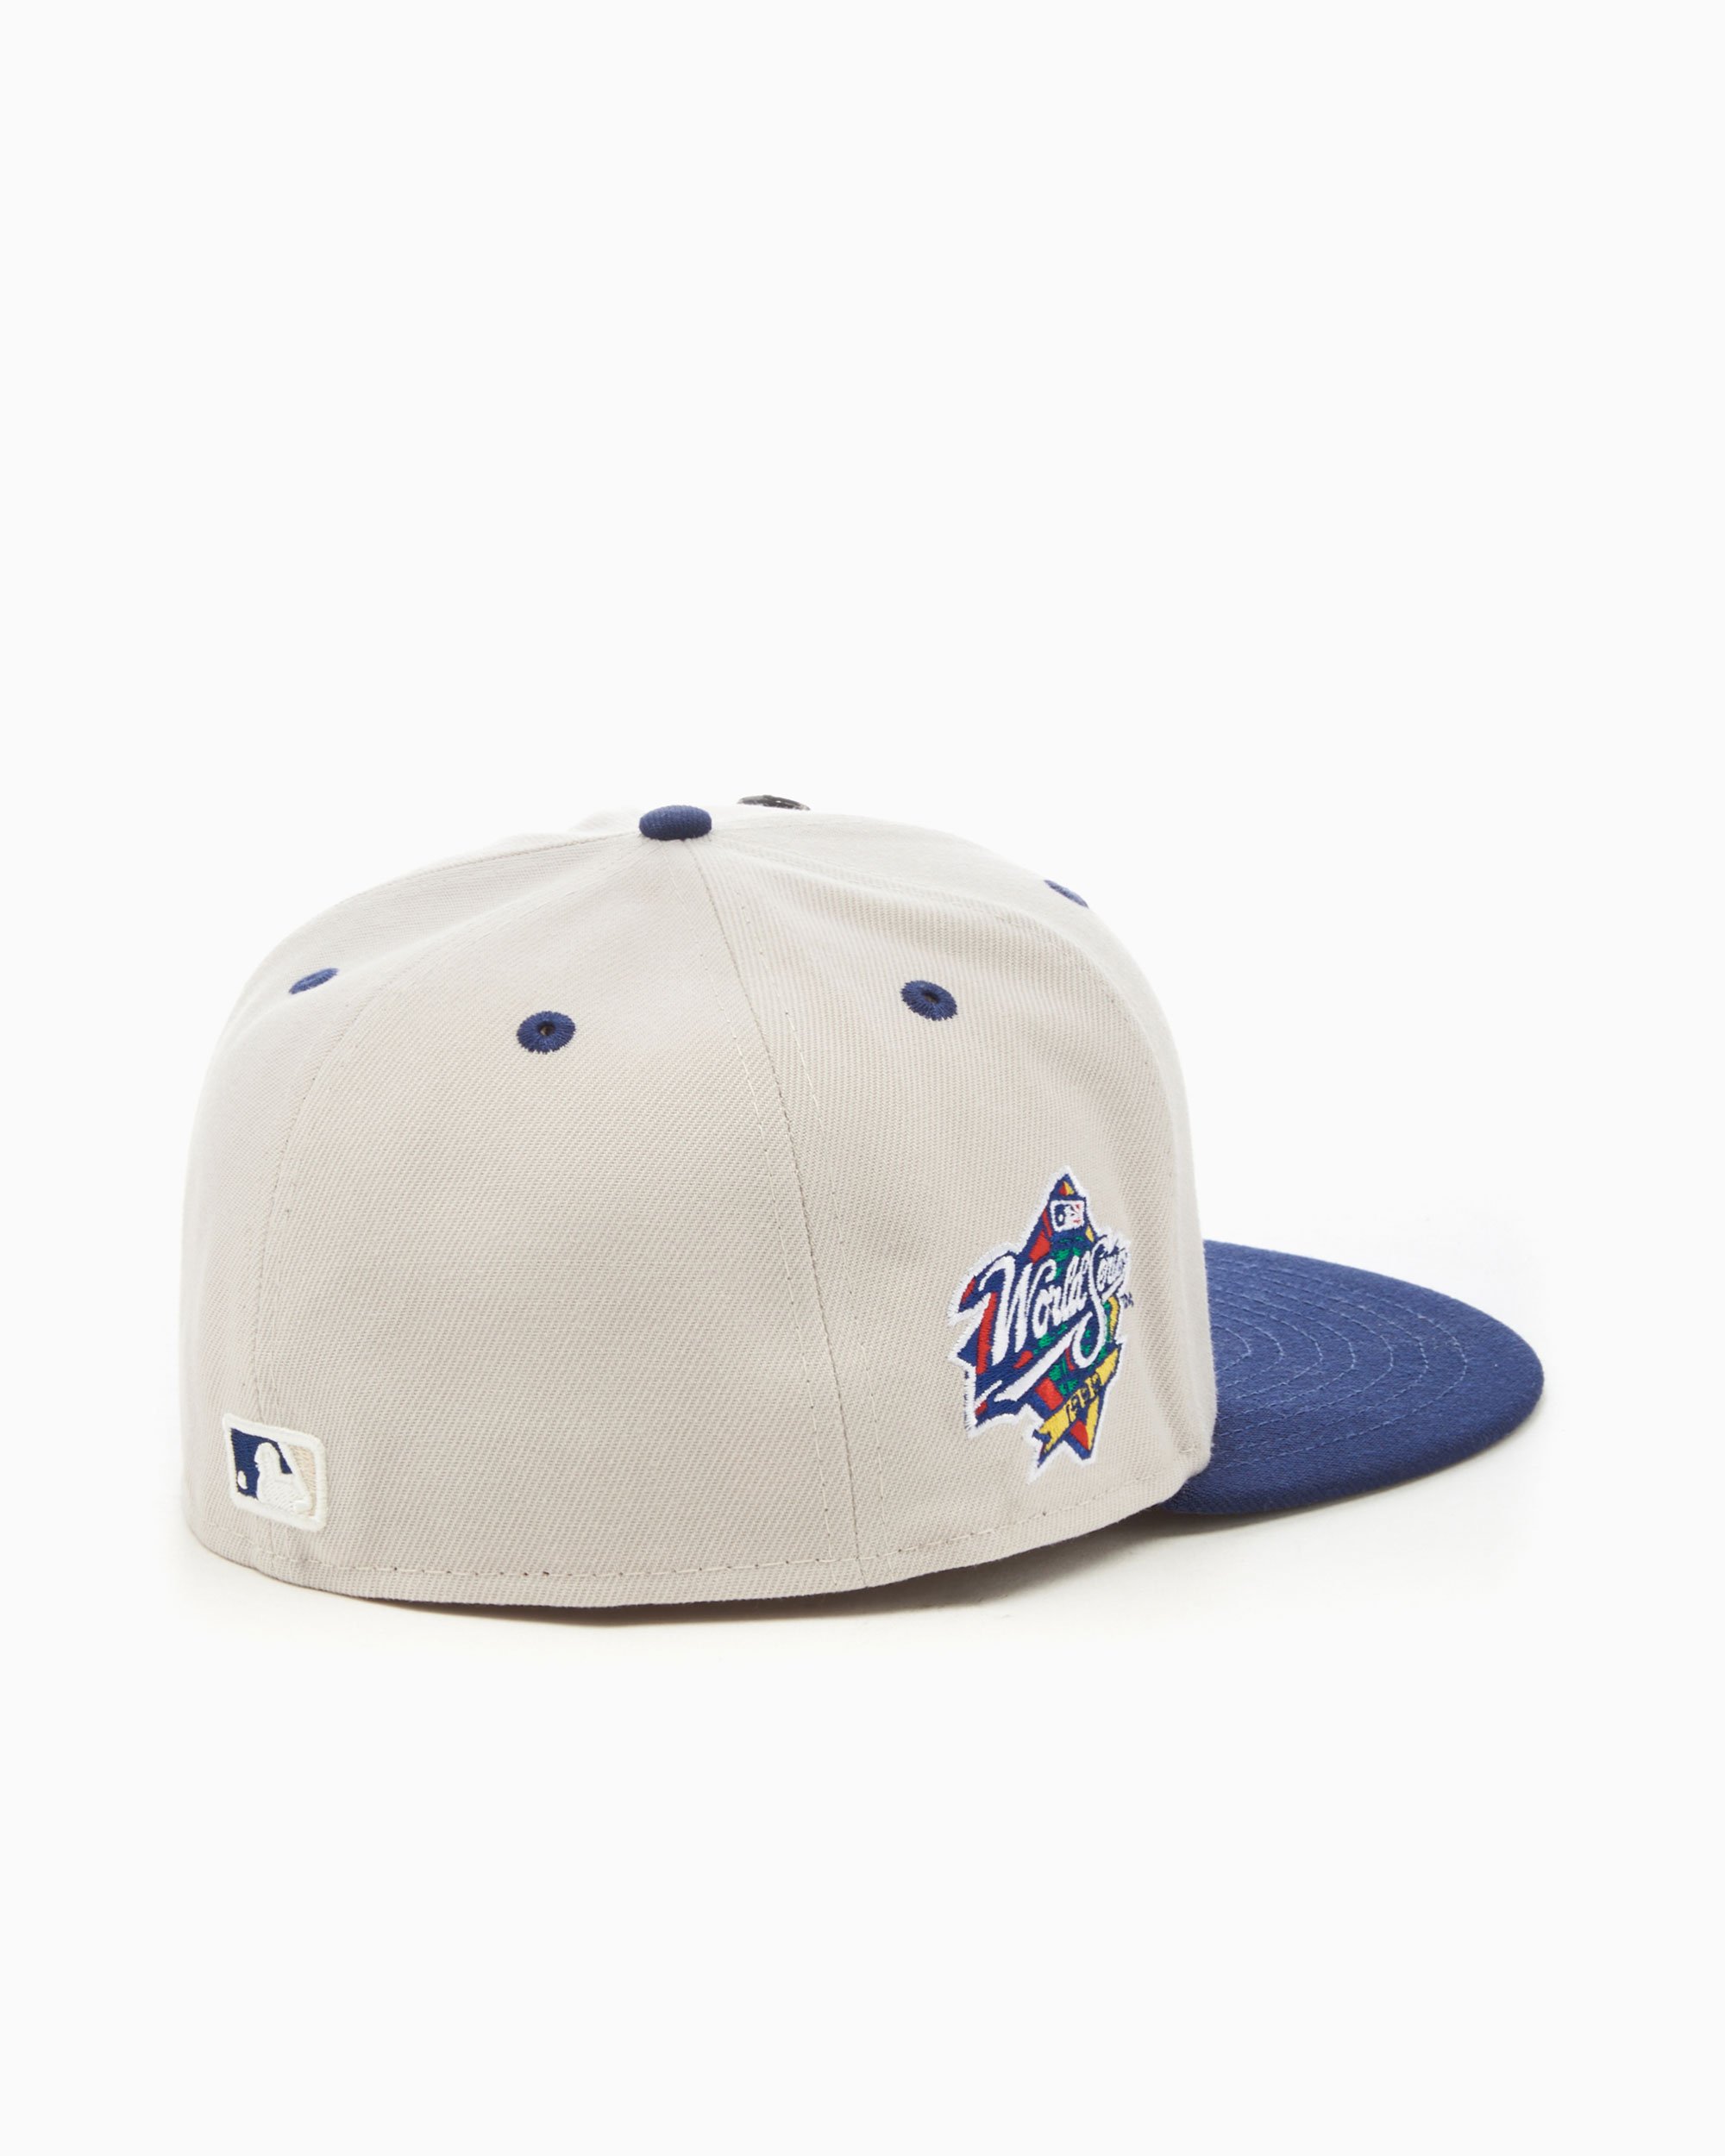 Fitted 60357993| New Yankees MLB at Cap World Online 59FIFTY York New Era Series Unisex FOOTDISTRICT Gray Buy